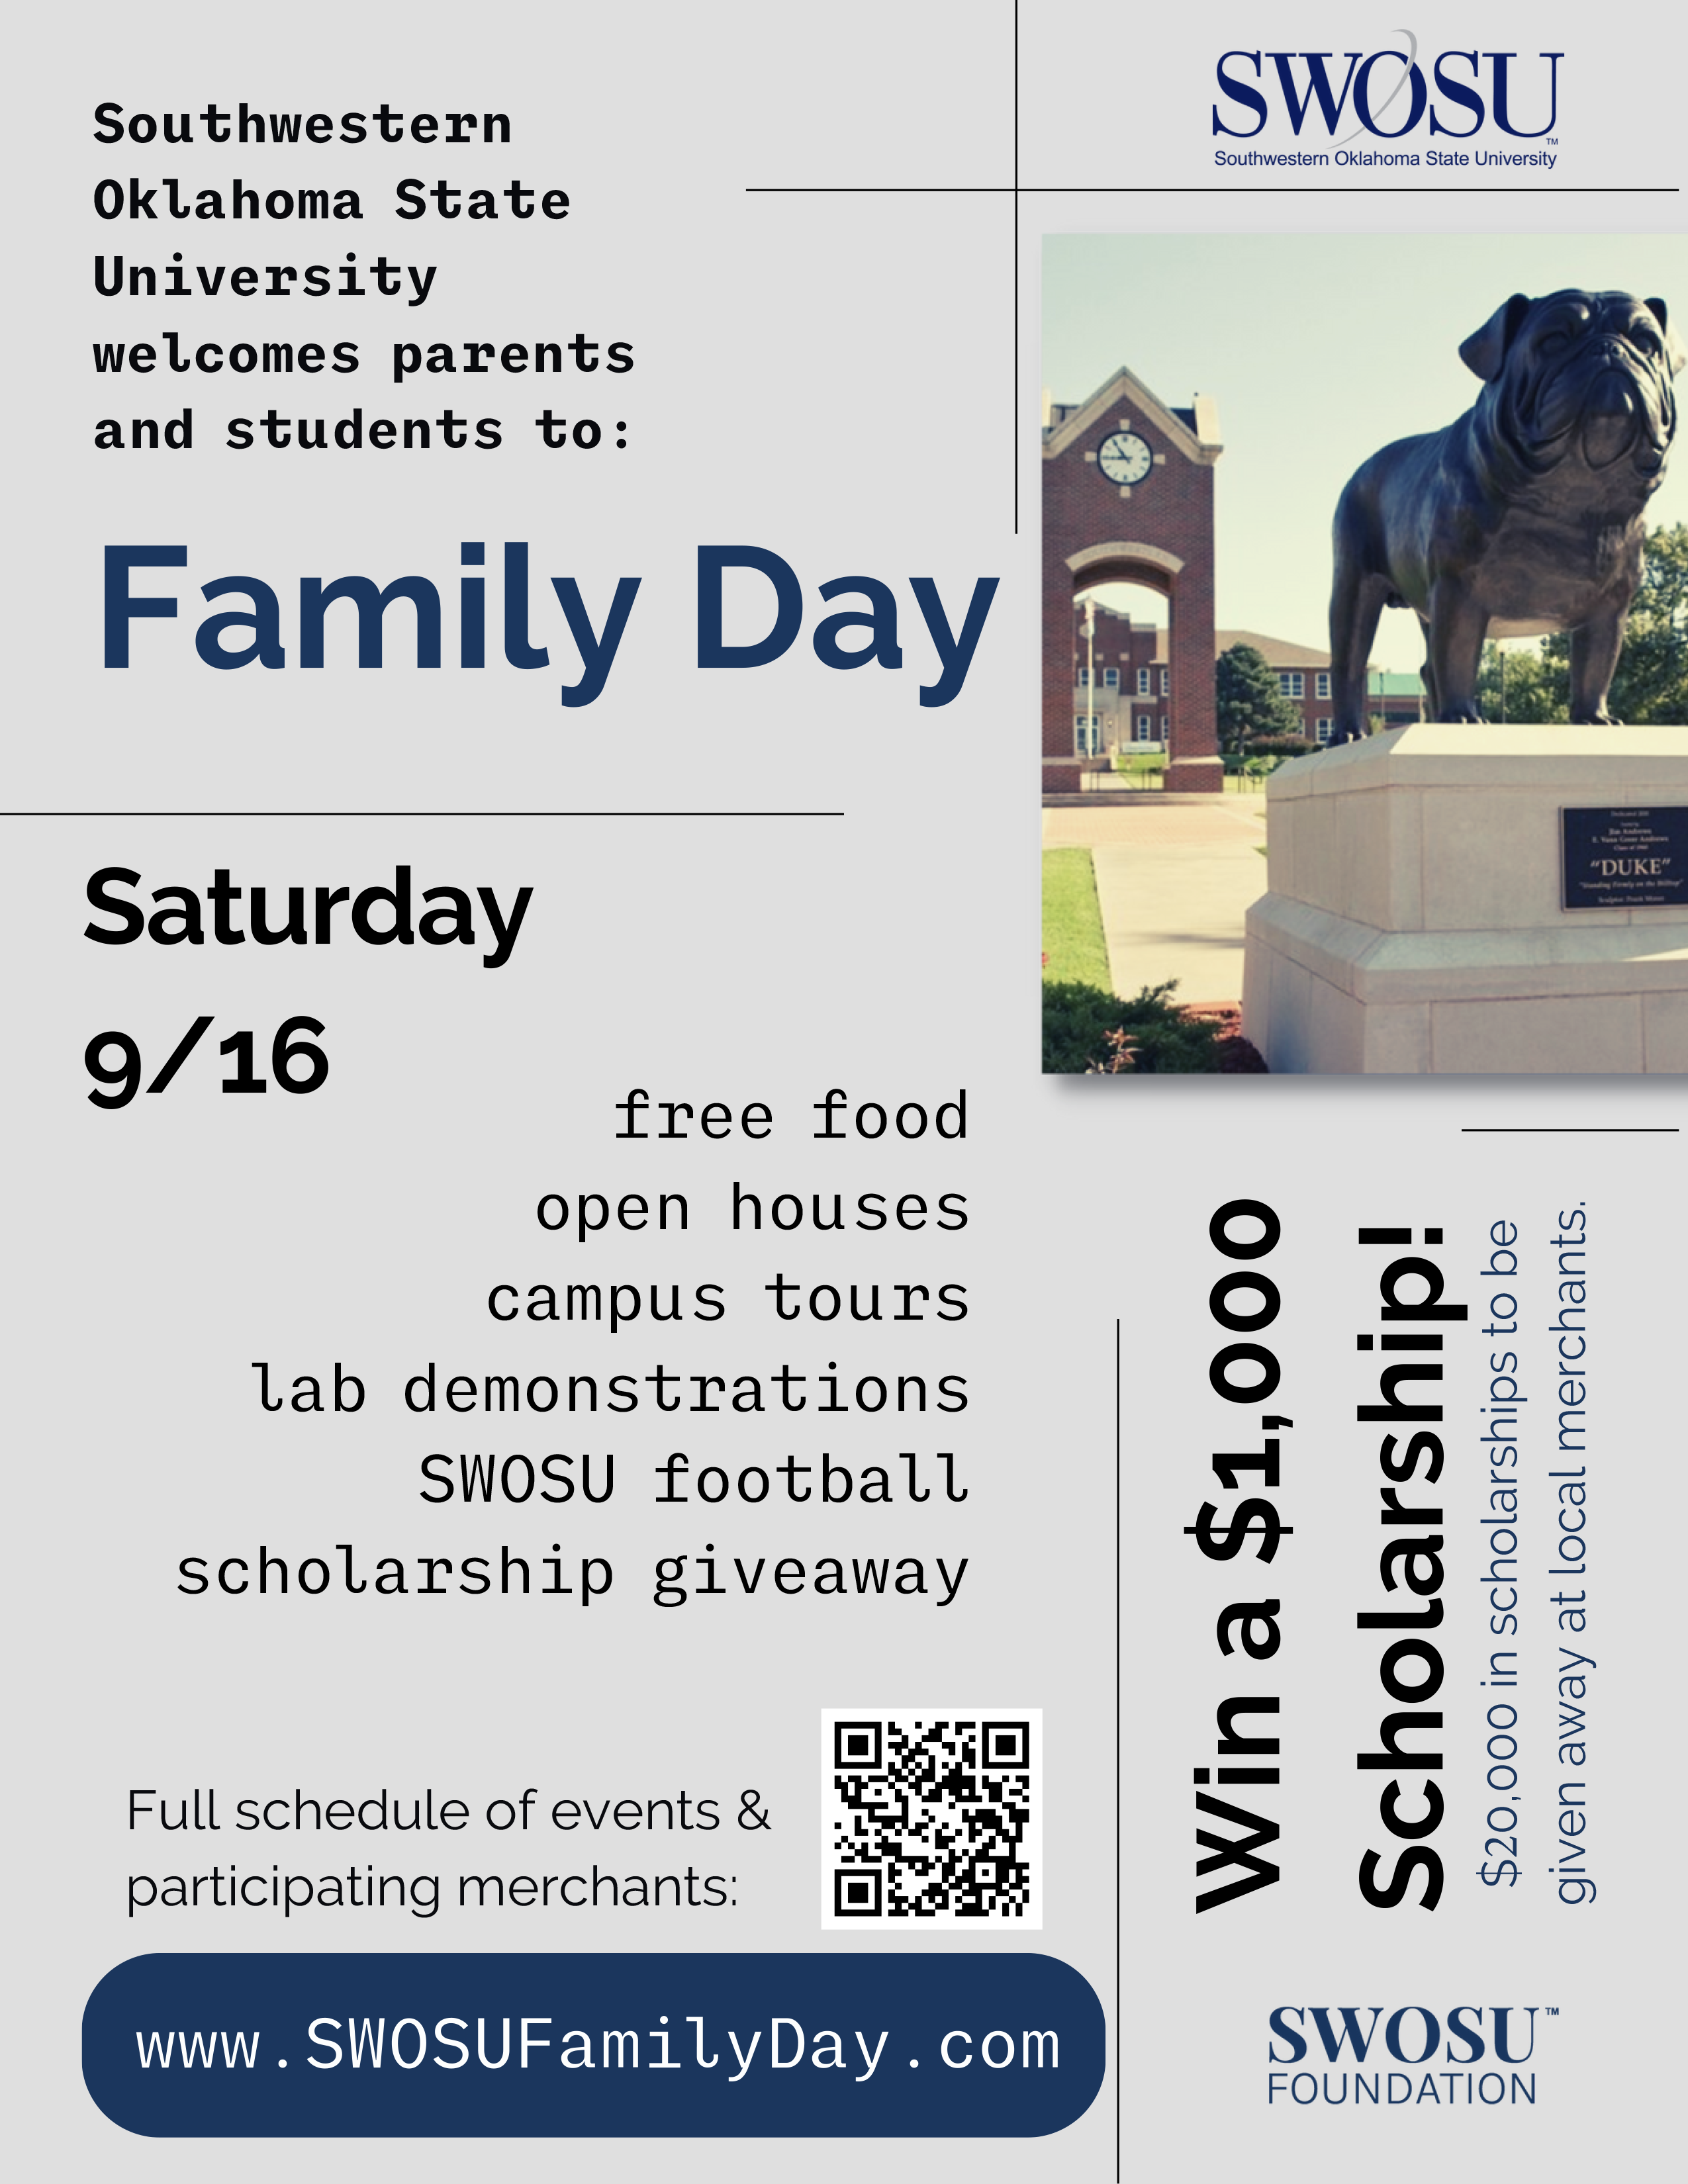 SWOSU welcomes parents and students to: Family Day. Saturday 9/16. Free food, open houses, campus tours, lab demonstrations, SWOSU football, scholarhsip giveaway. Win a $1,000 Scholarship! $20,000 in scholarships to be given away. Full schedule of events & participating merchants: QR Code. www.swosufamilyday.com SWOSU Foundation